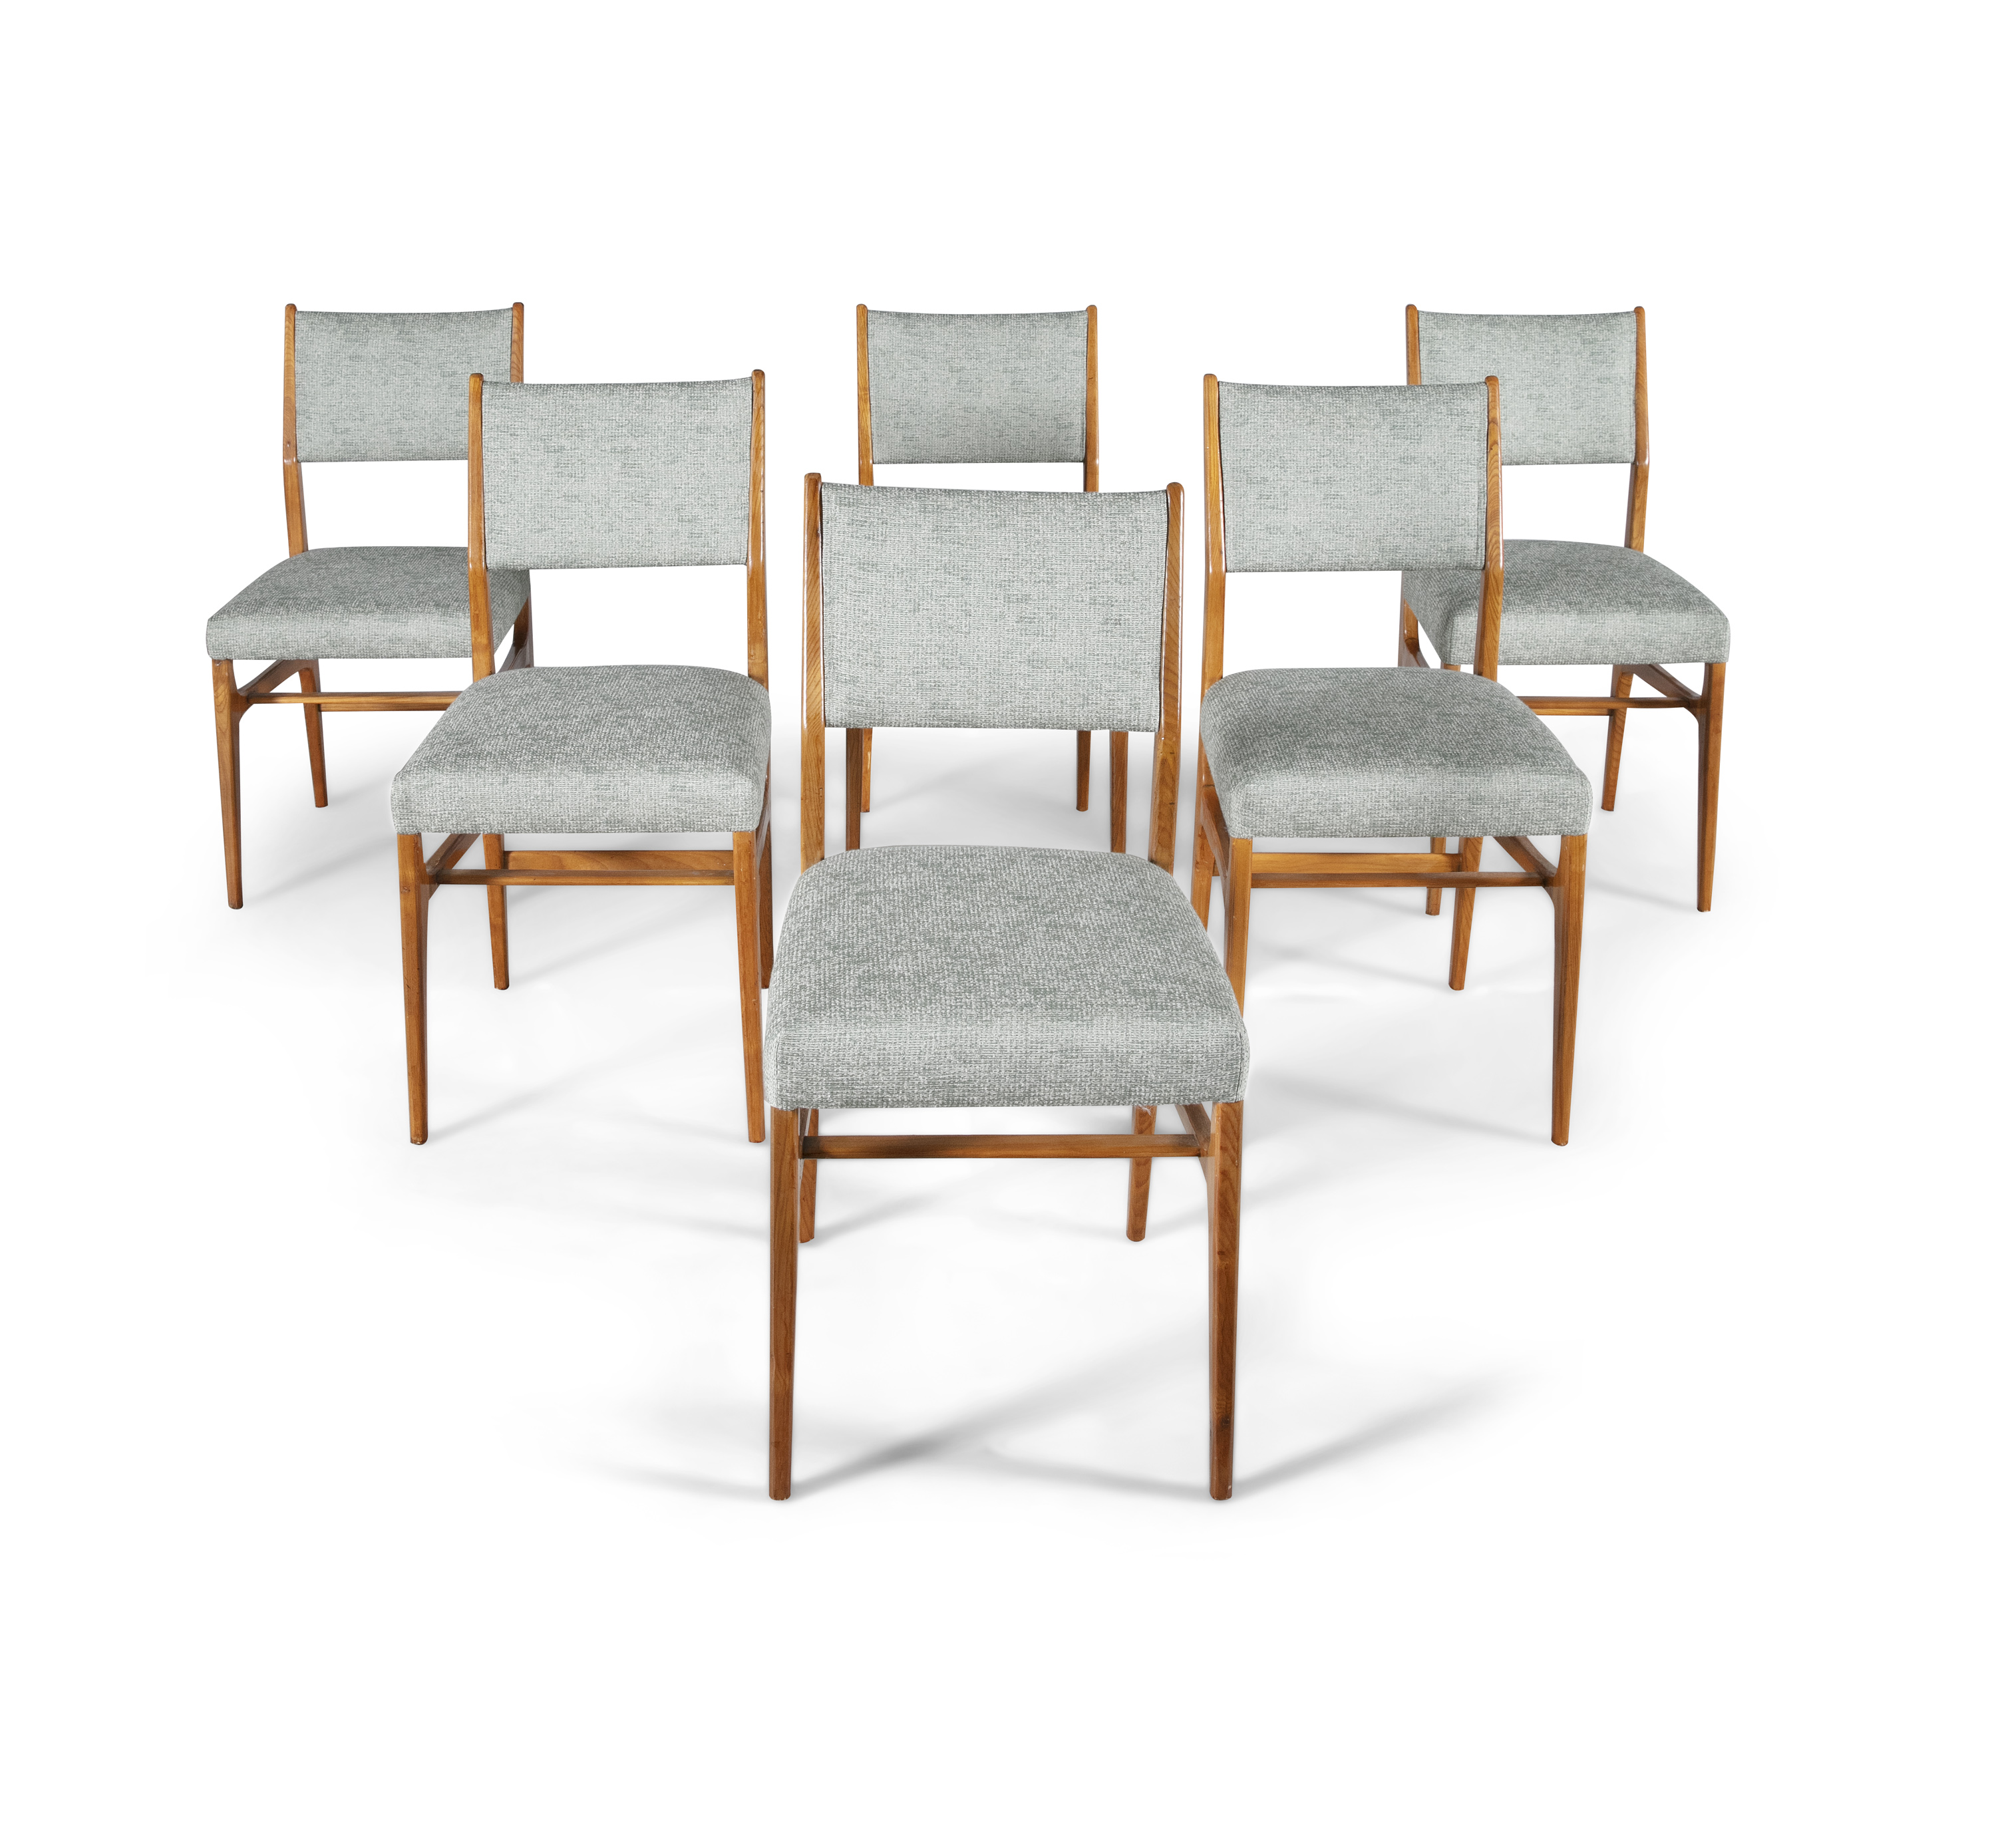 GIO PONTI A set of six 'Model 602' dining chairs by Gio Ponti, Italy c.1955. 86 x 43 x 45cm With